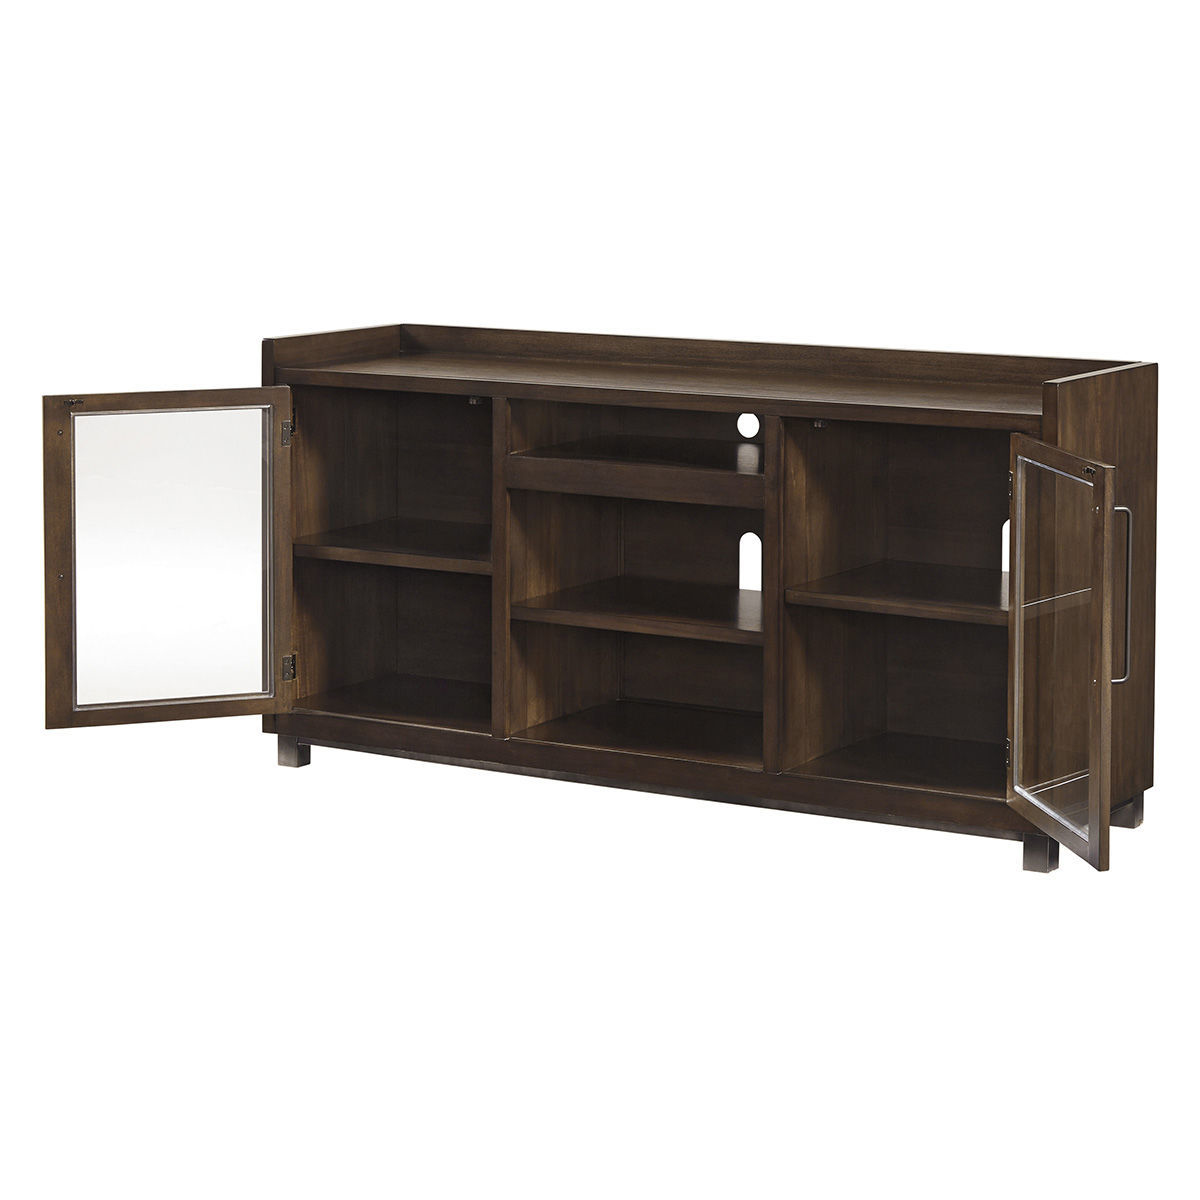 Picture of Daryl 70" TV Stand